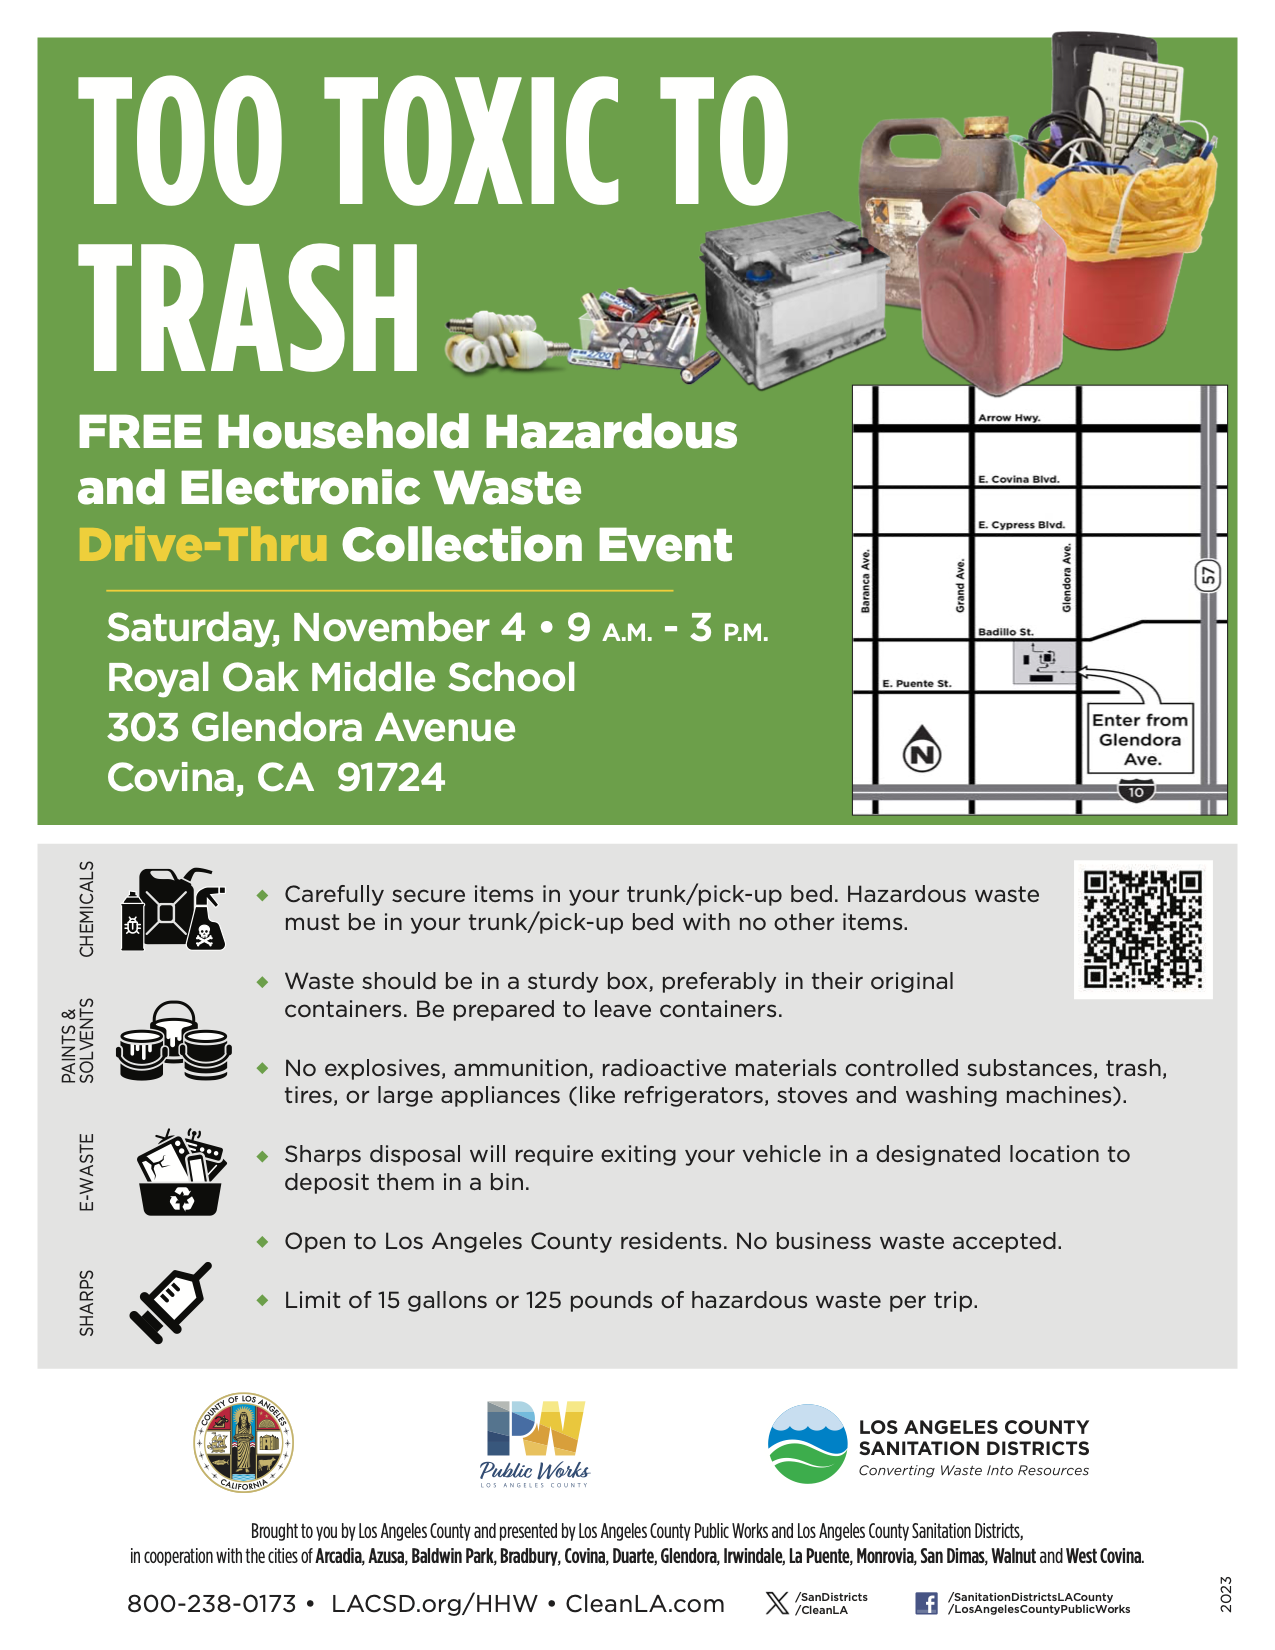 FREE Household Hazardous Waste Recycling Event for COVINA 2023